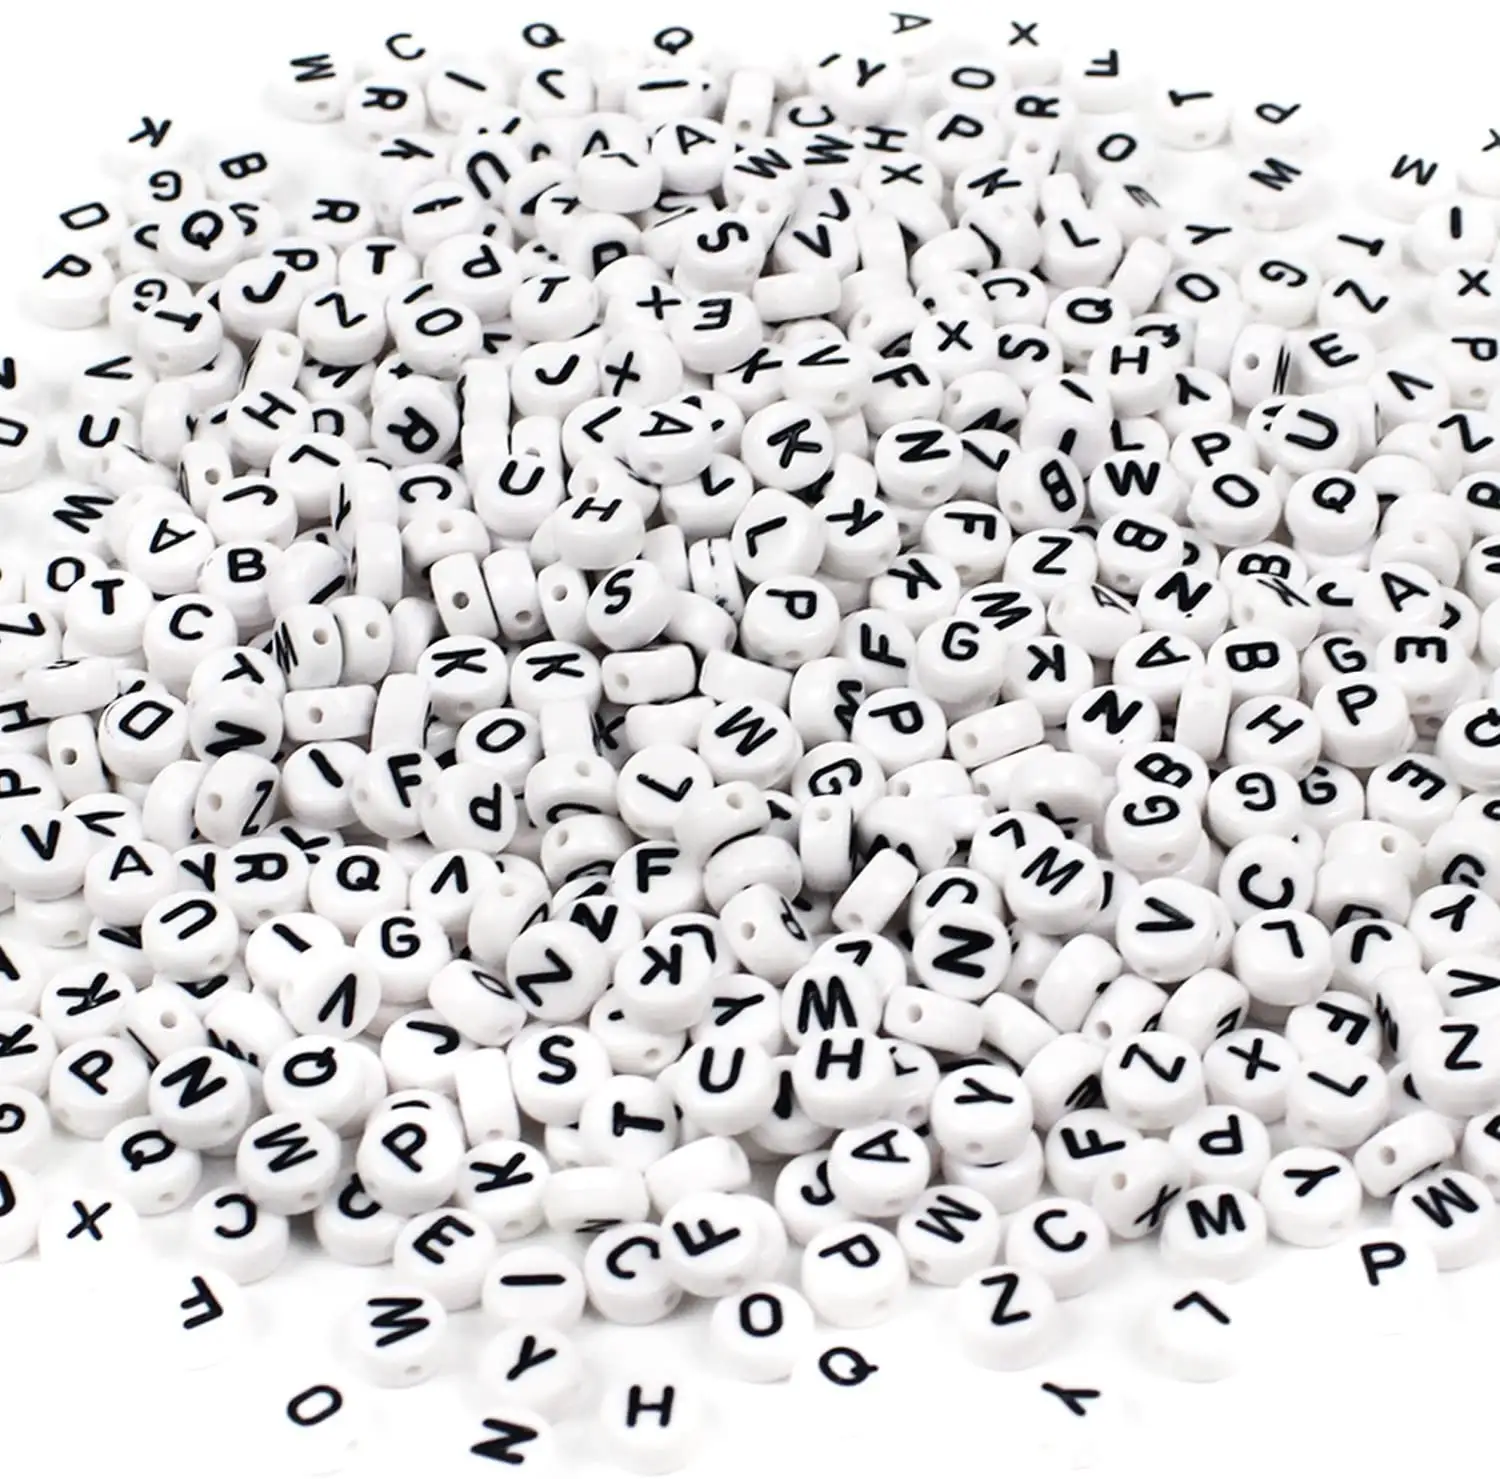 Letter Beads Round Shape A-Z 600 pcs/Bag 4 x7 MM Acrylic White Round Letter Beads for Bracelets and Jewelry Making, with Thread